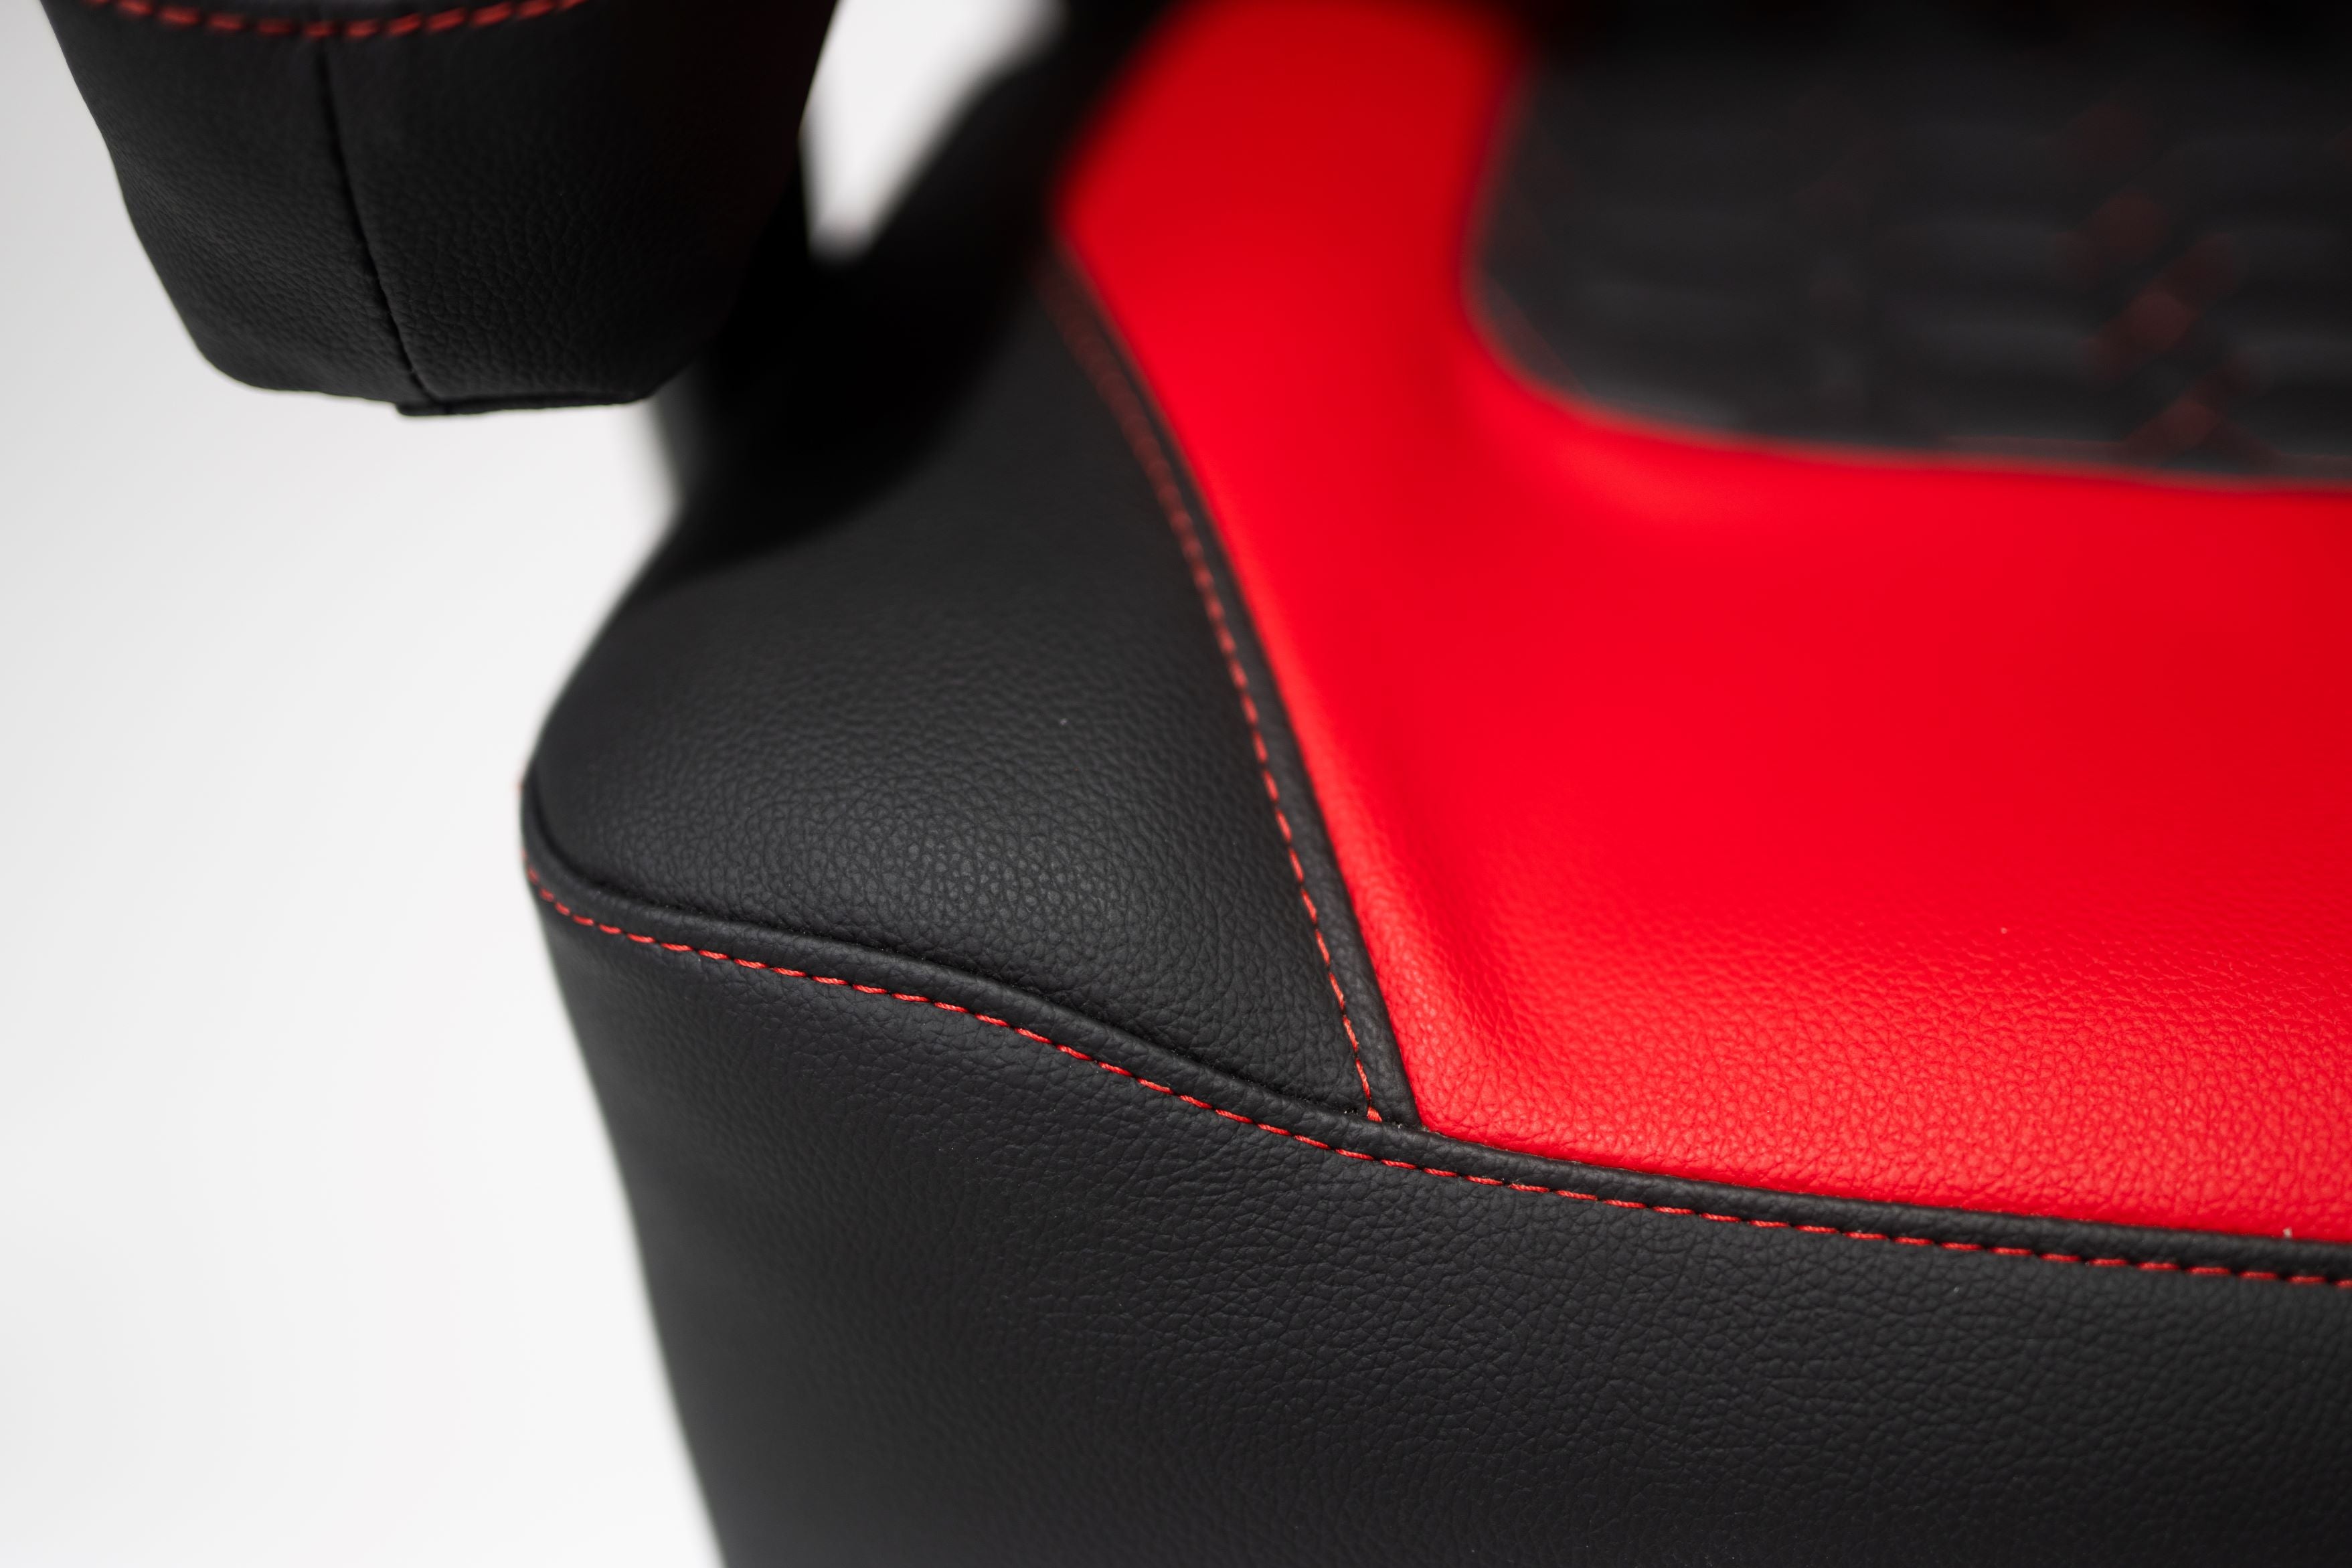 Kratos 4D Throne V2 Corner Cushion showing red stitching and black thermal leather